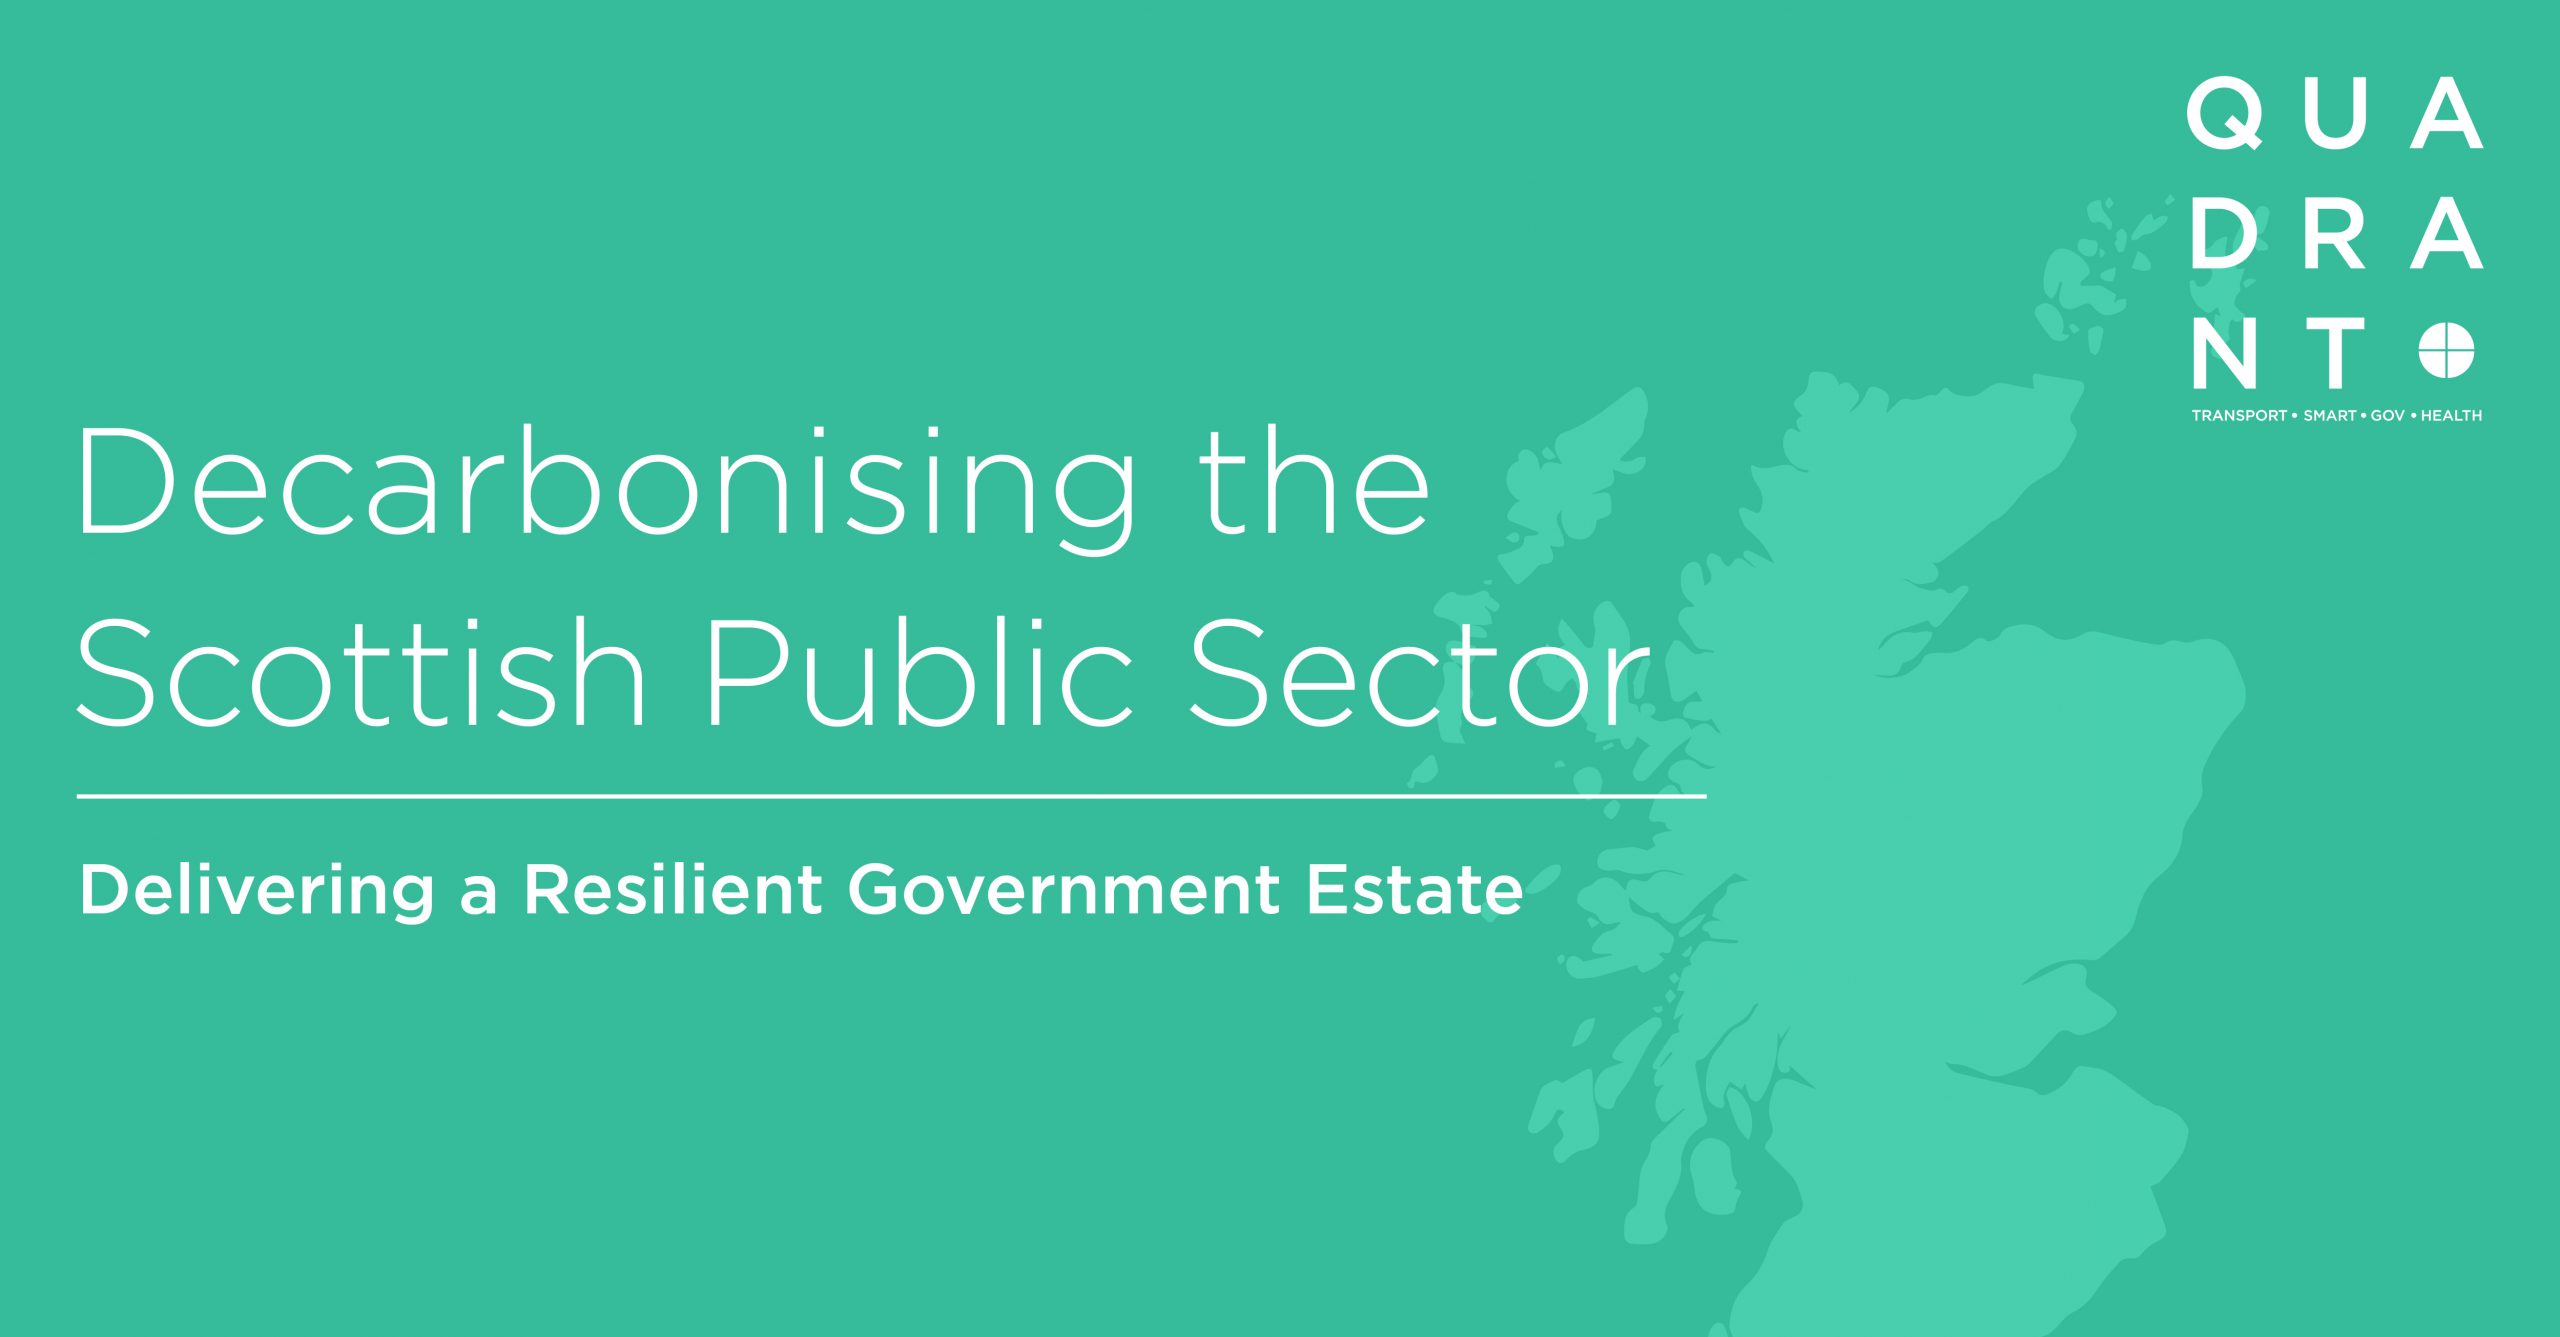 Delivering a Resilient Government Estate